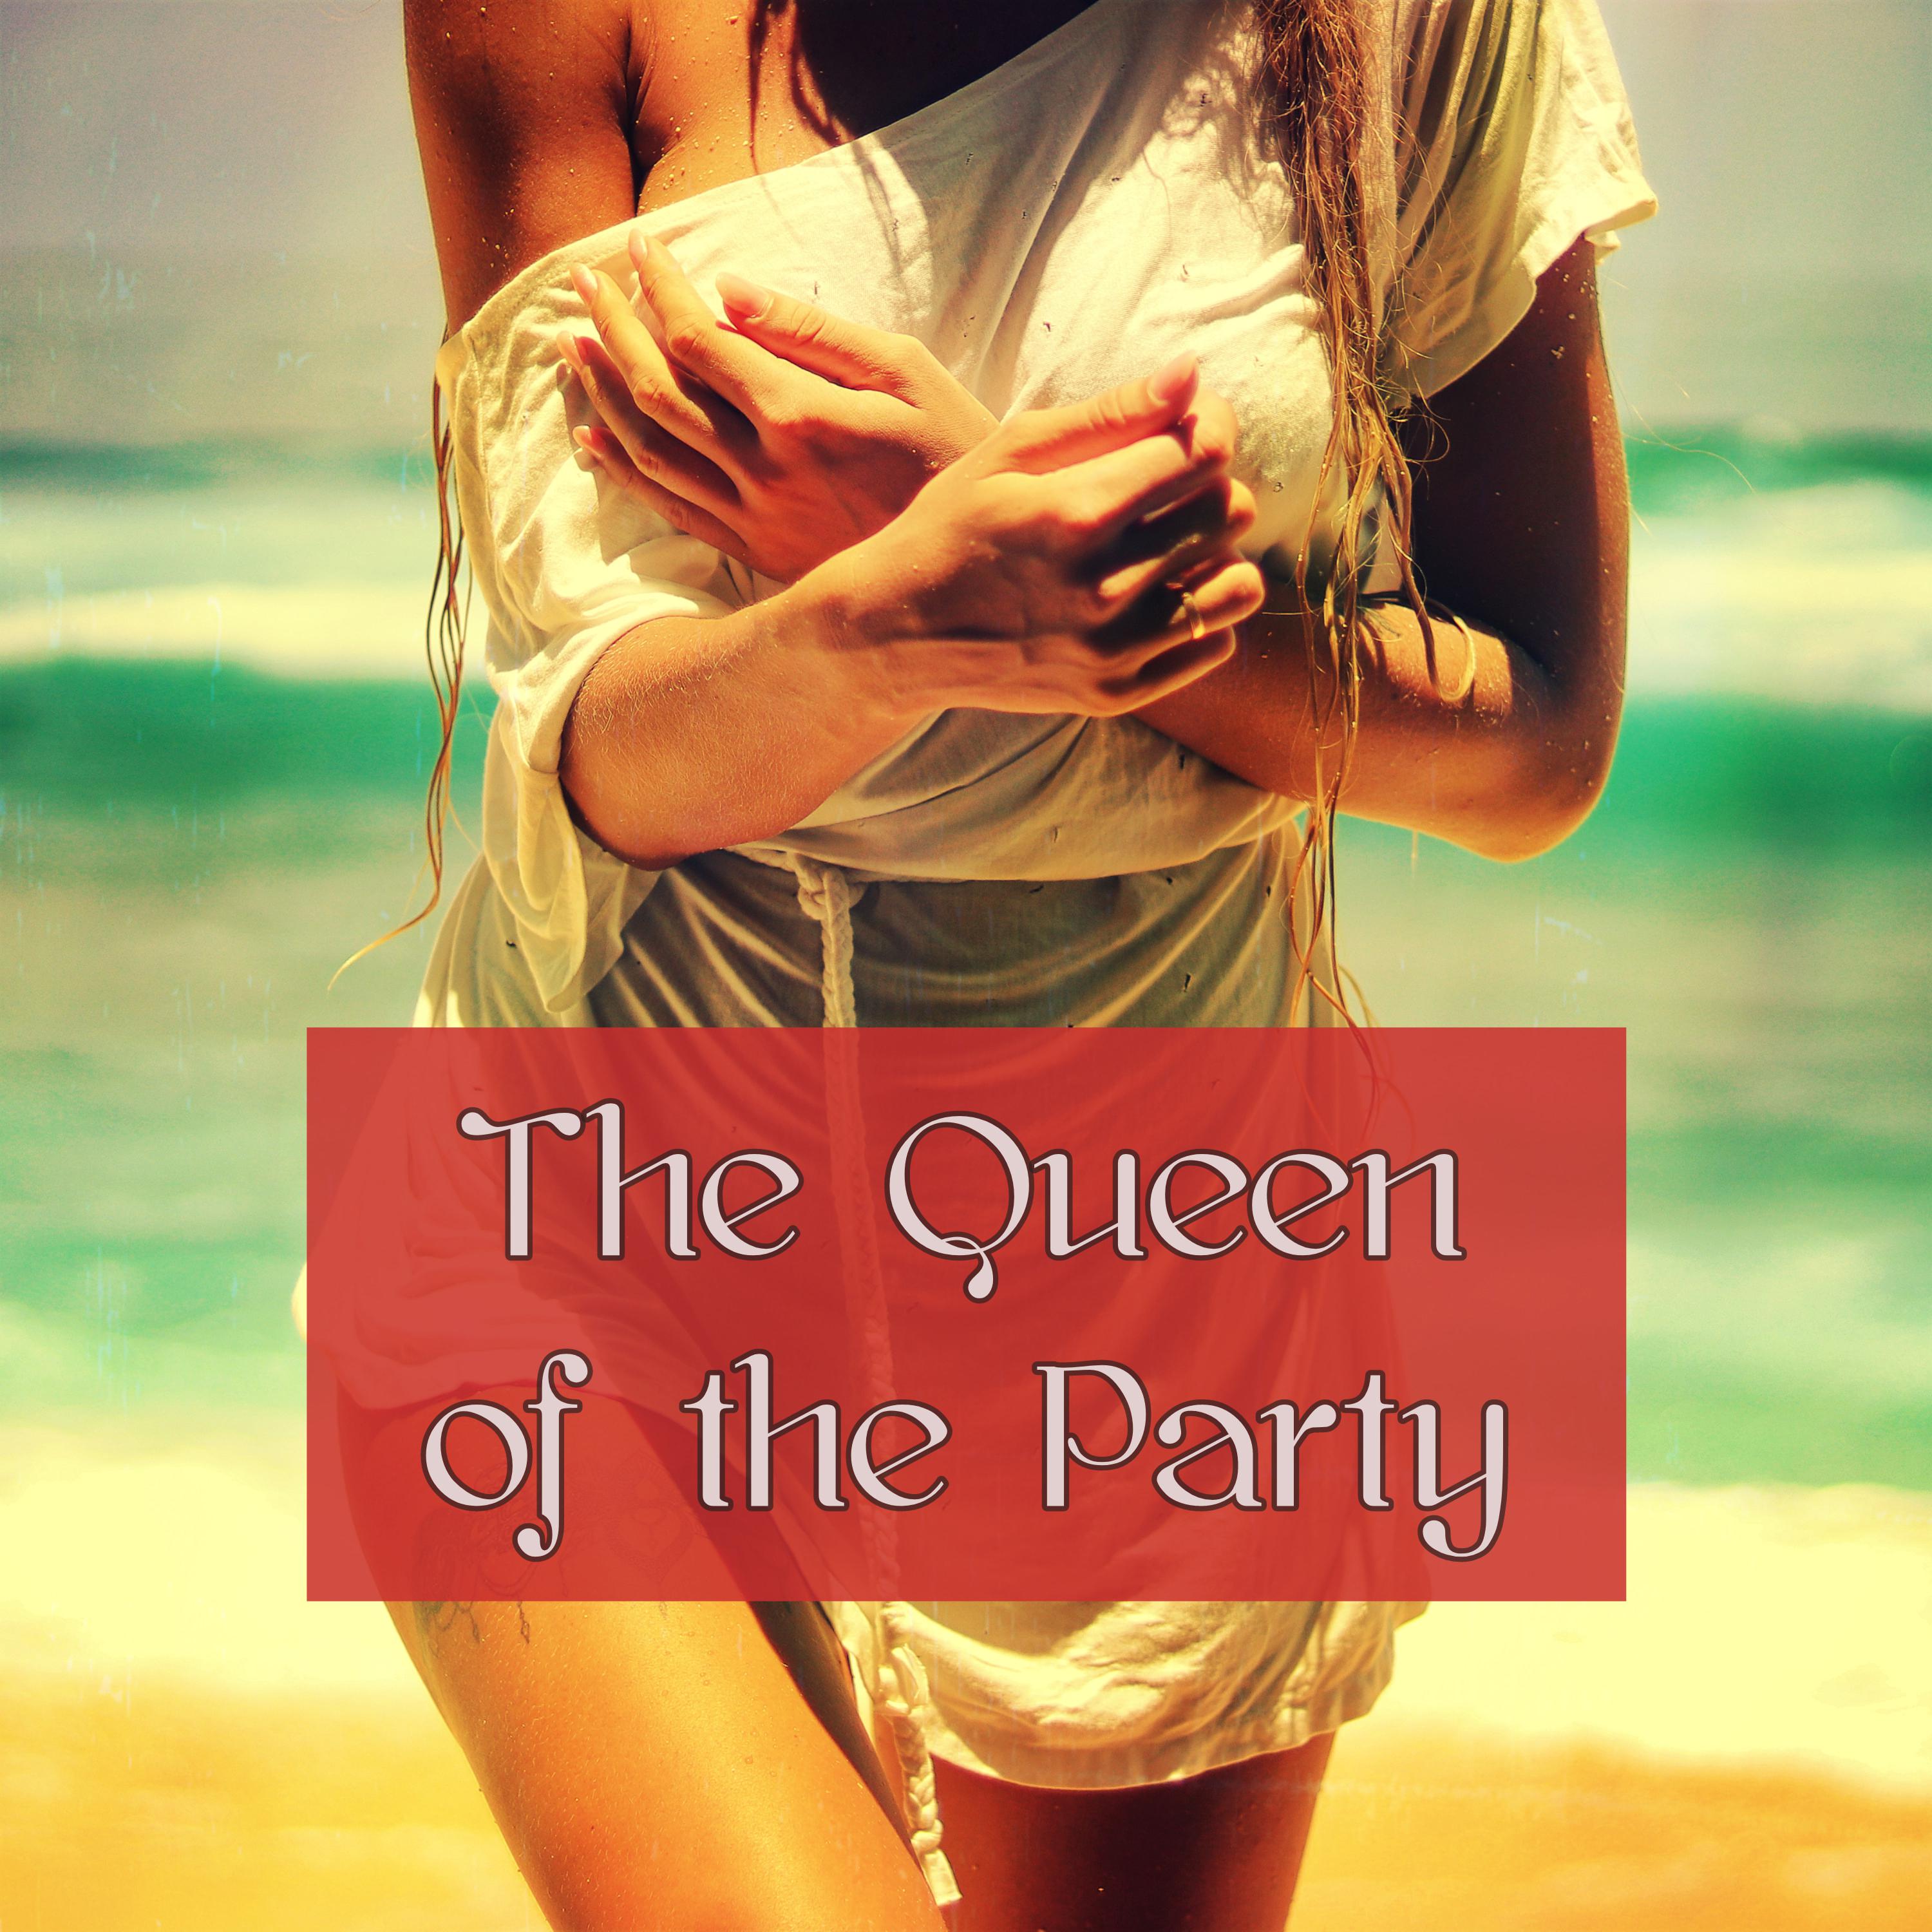 The Queen of the Party